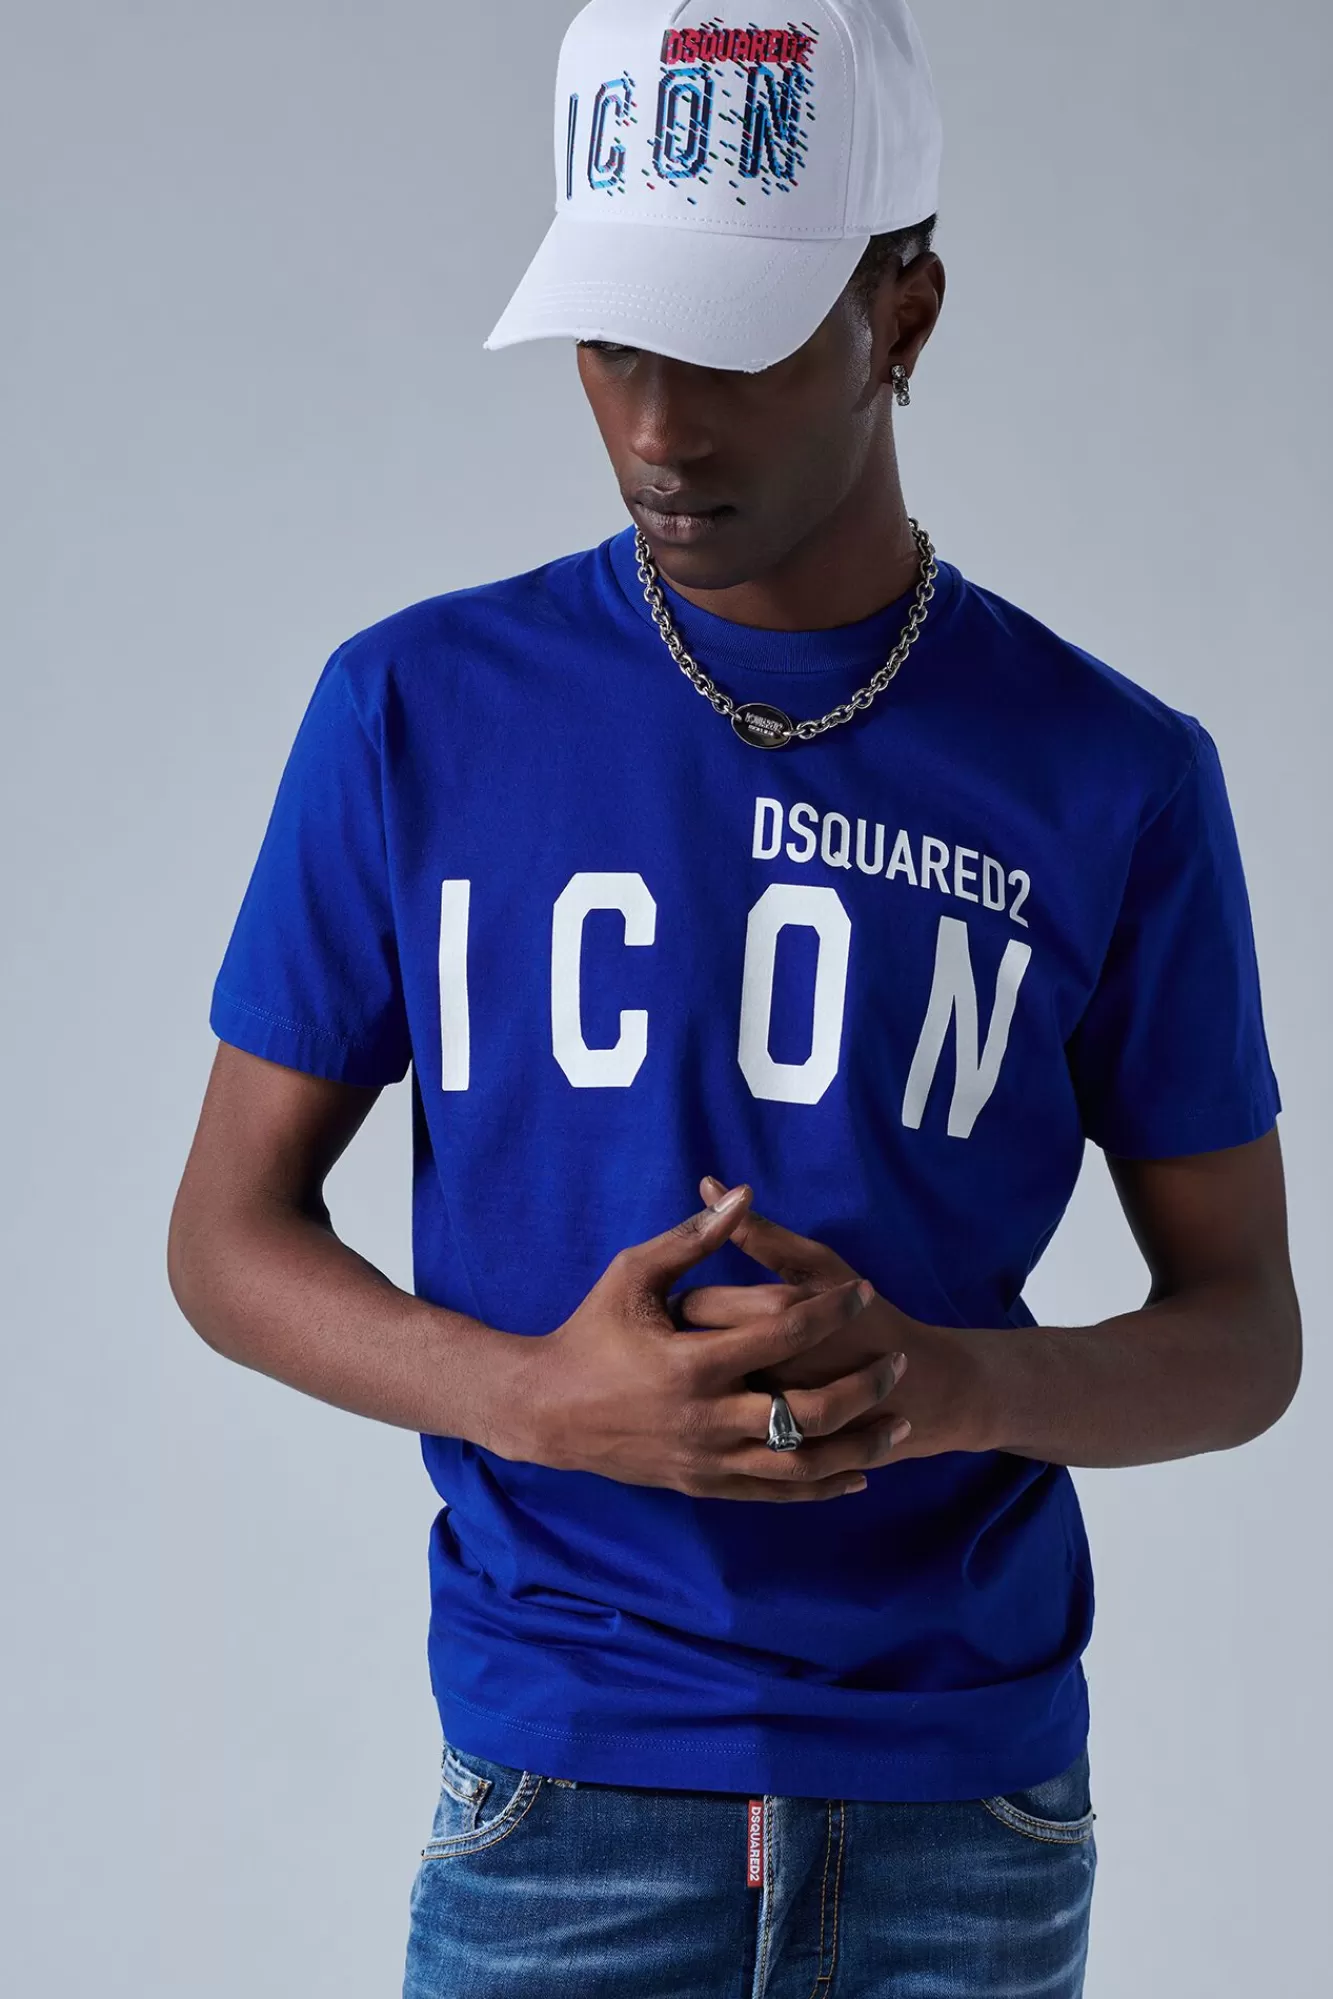 Be Icon Cool T-Shirt<Dsquared2 Store